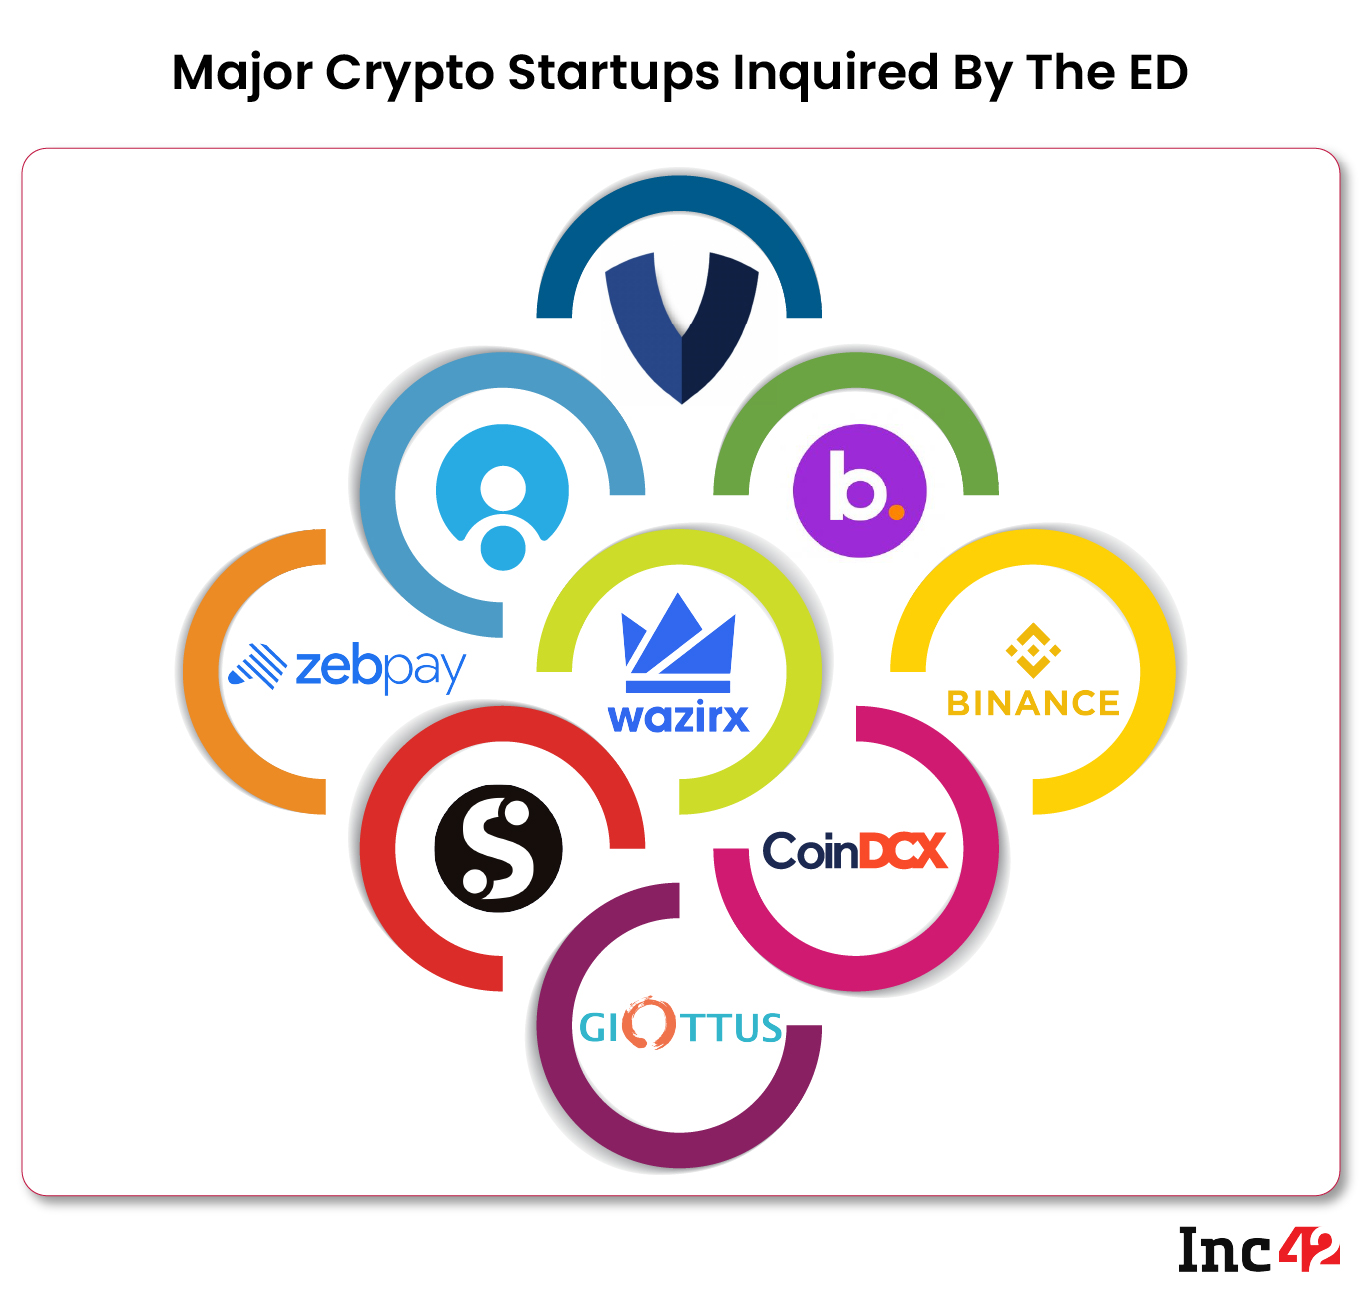 Major crypto startups inquired by the ED